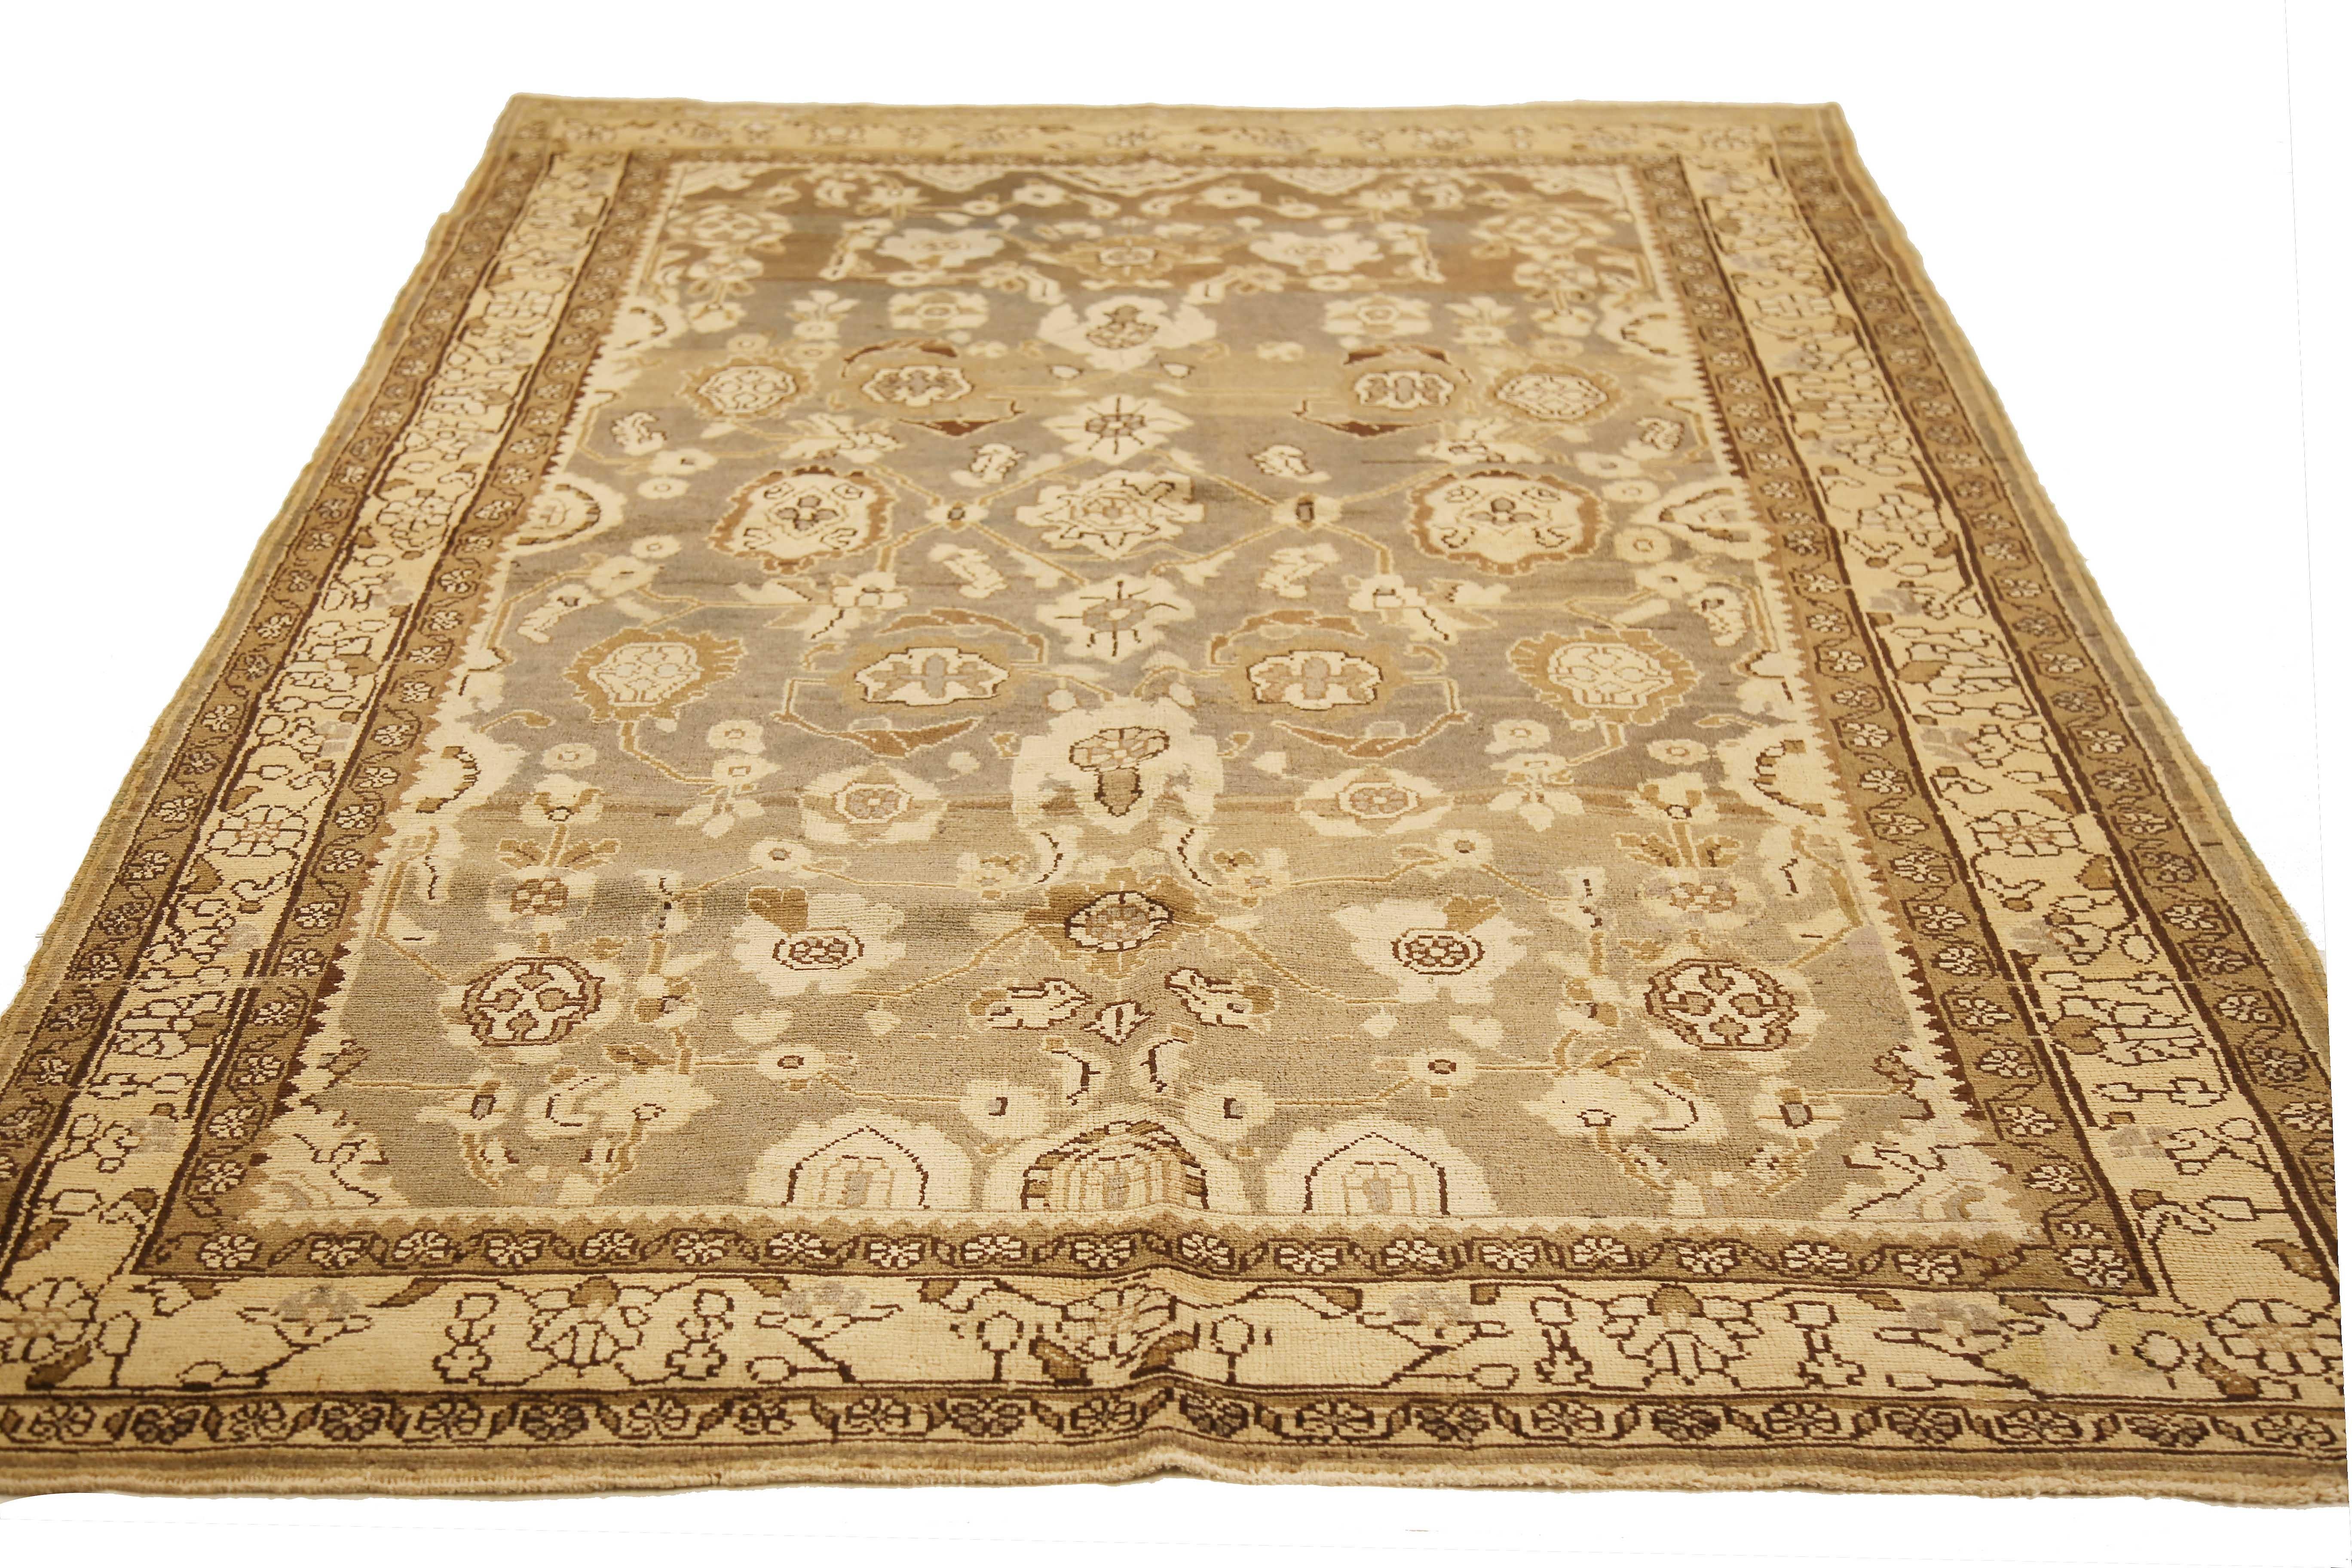 Antique Persian rug handwoven from the finest sheep’s wool and colored with all-natural vegetable dyes that are safe for humans and pets. It’s a traditional Malayer design featuring beige and brown botanical details on the ivory and gray field. It’s